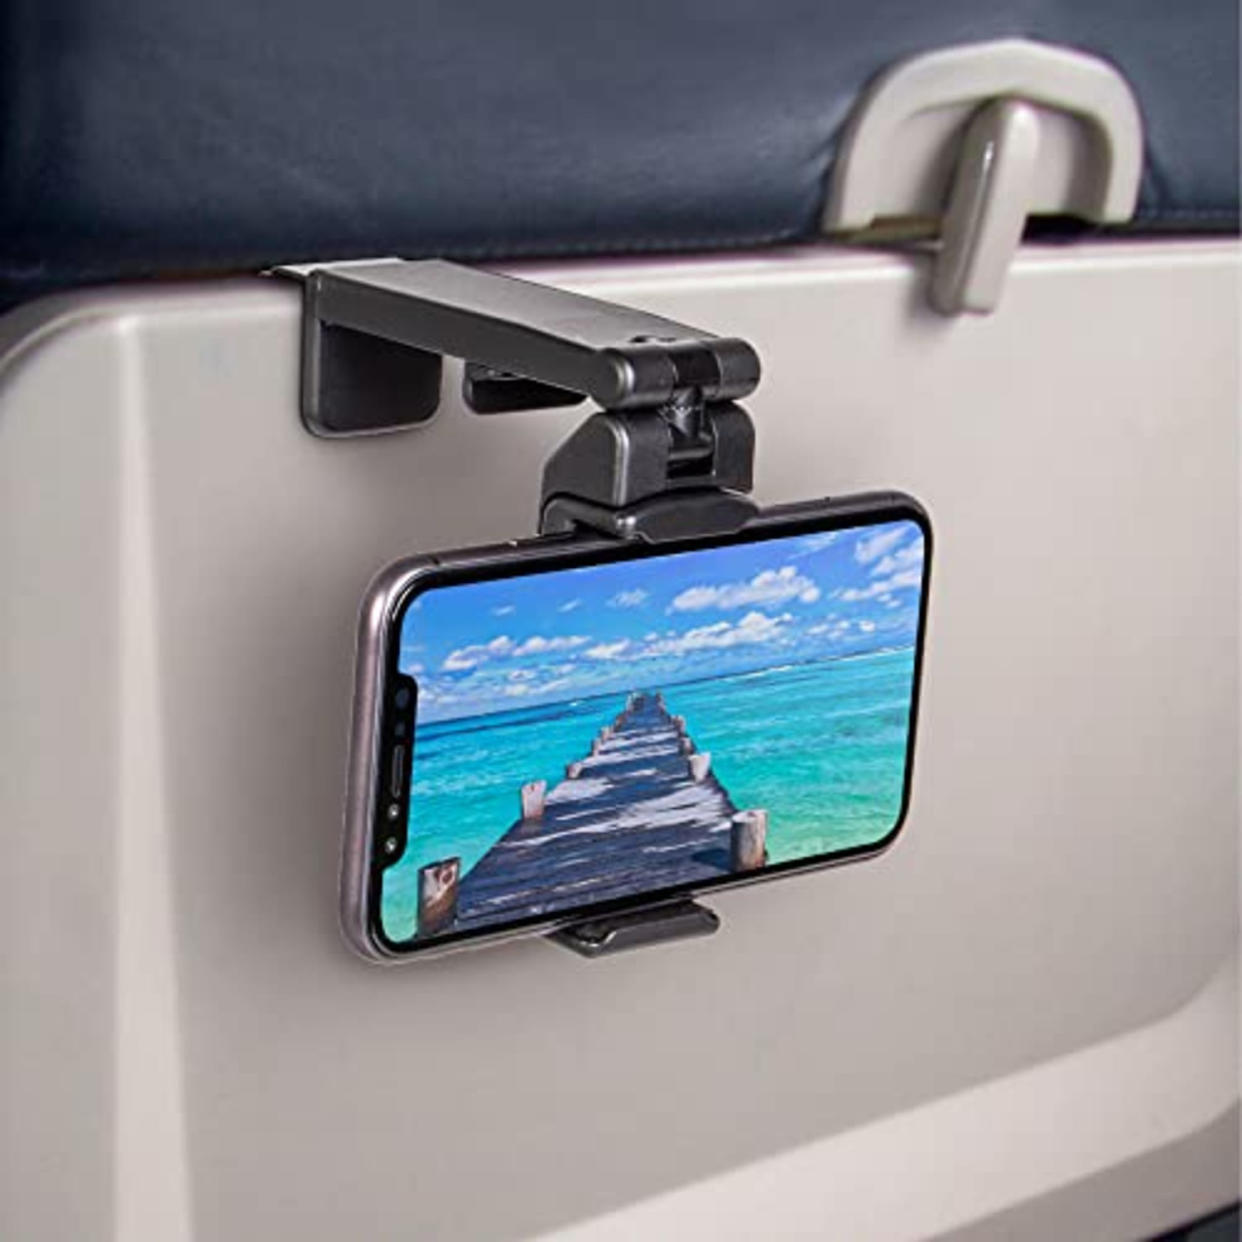 Perilogics Universal in Flight Airplane Phone Holder Mount. Hands Free Viewing with Multi-Directional Dual 360 Degree Rotation. Pocket Size Must Have Travel Essential Accessory for Flying (Amazon / Amazon)